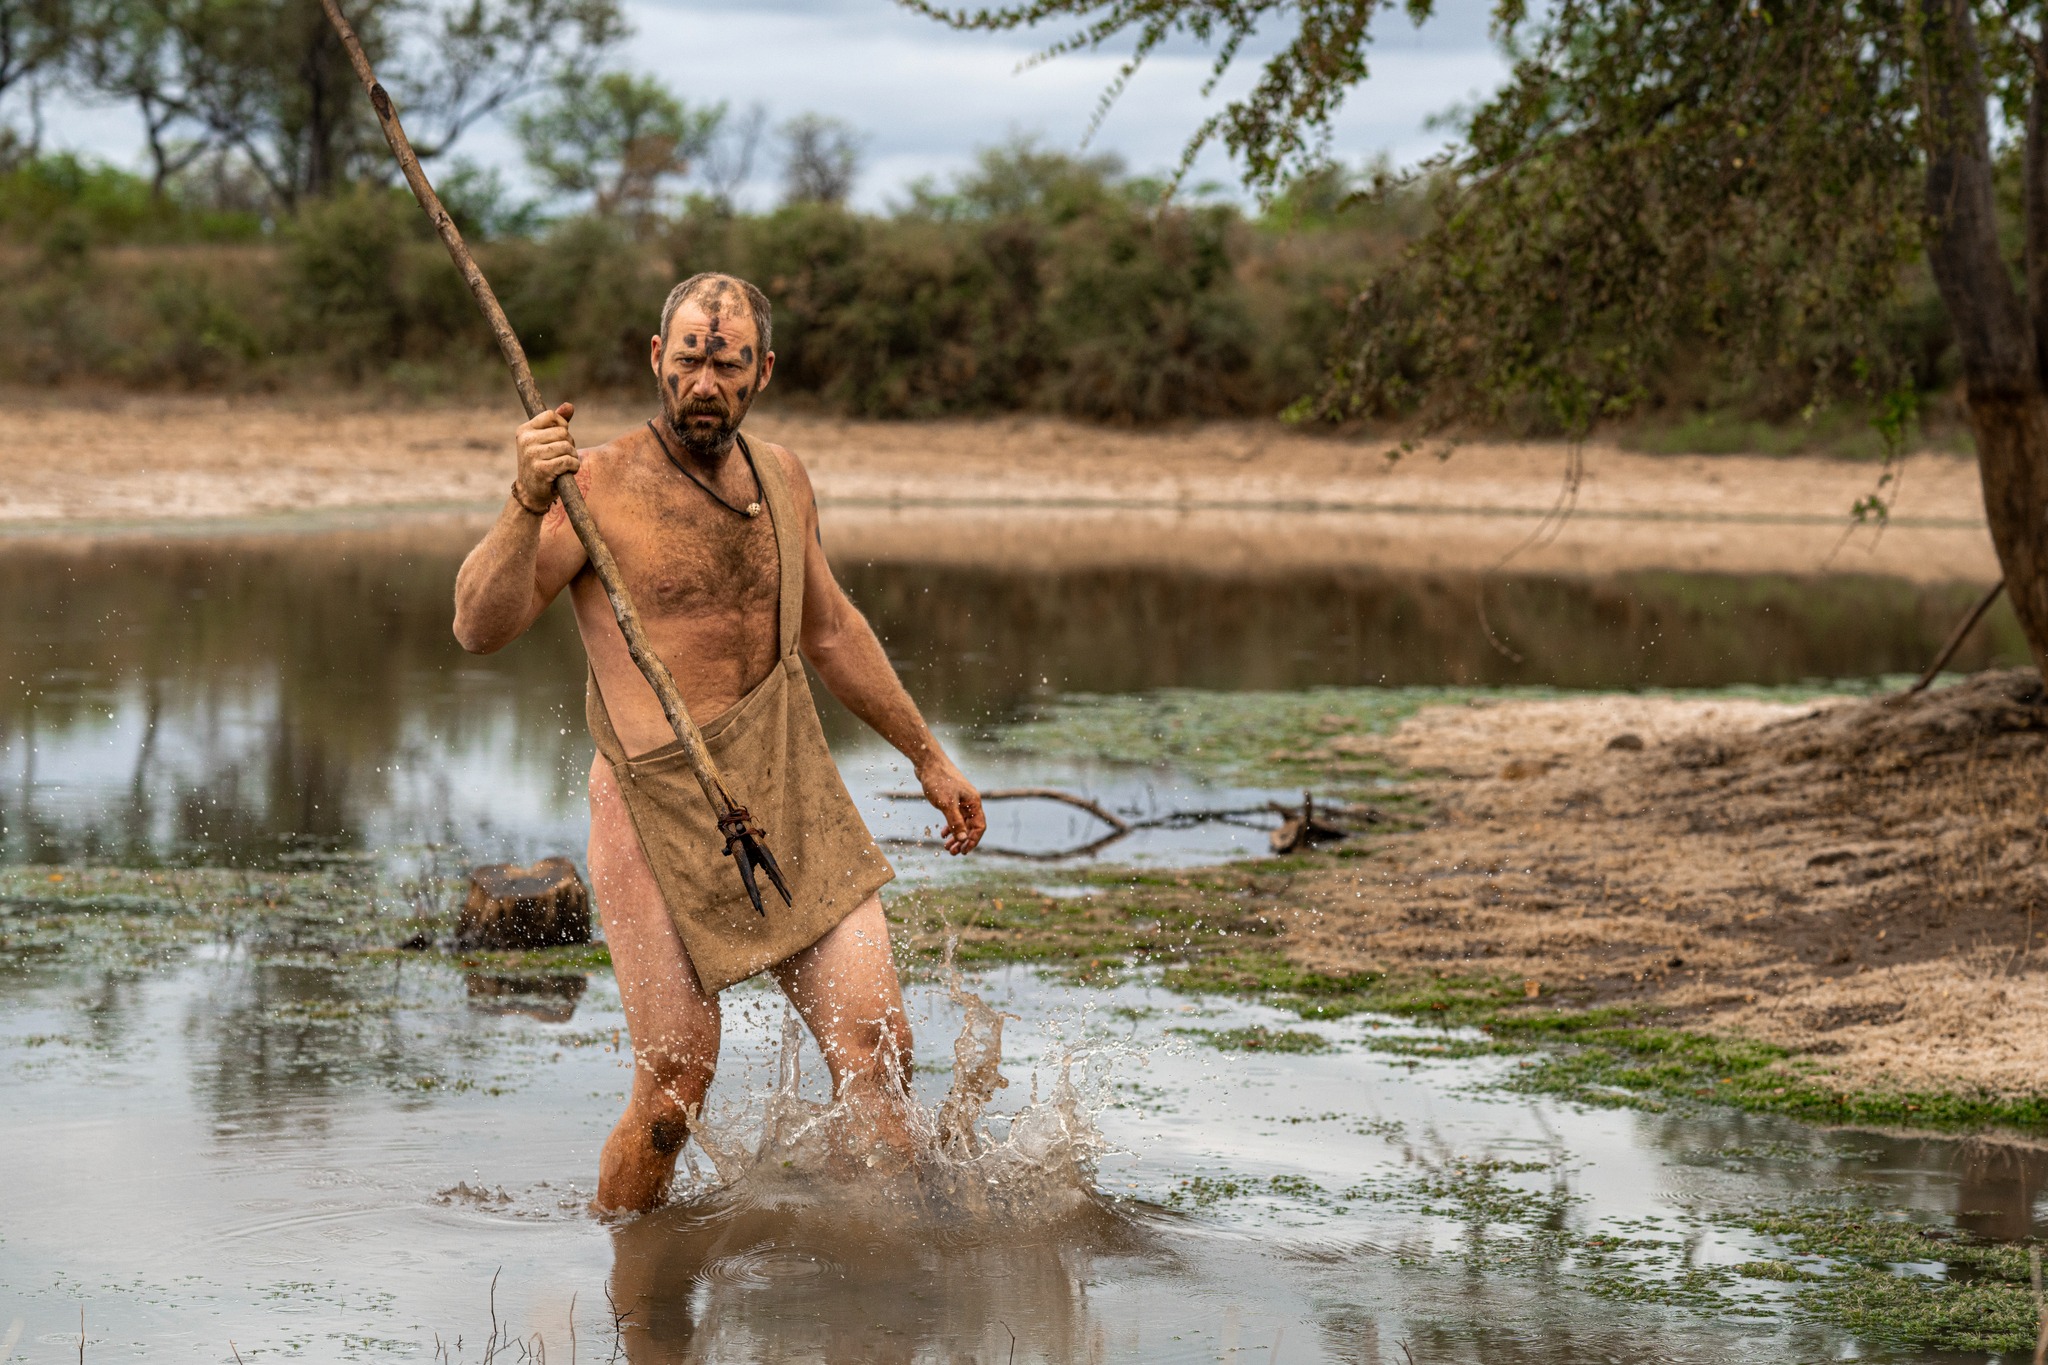 #Naked and Afraid: Season 17 Premiere Date Set for Discovery Channel’s Survival Series (Watch)